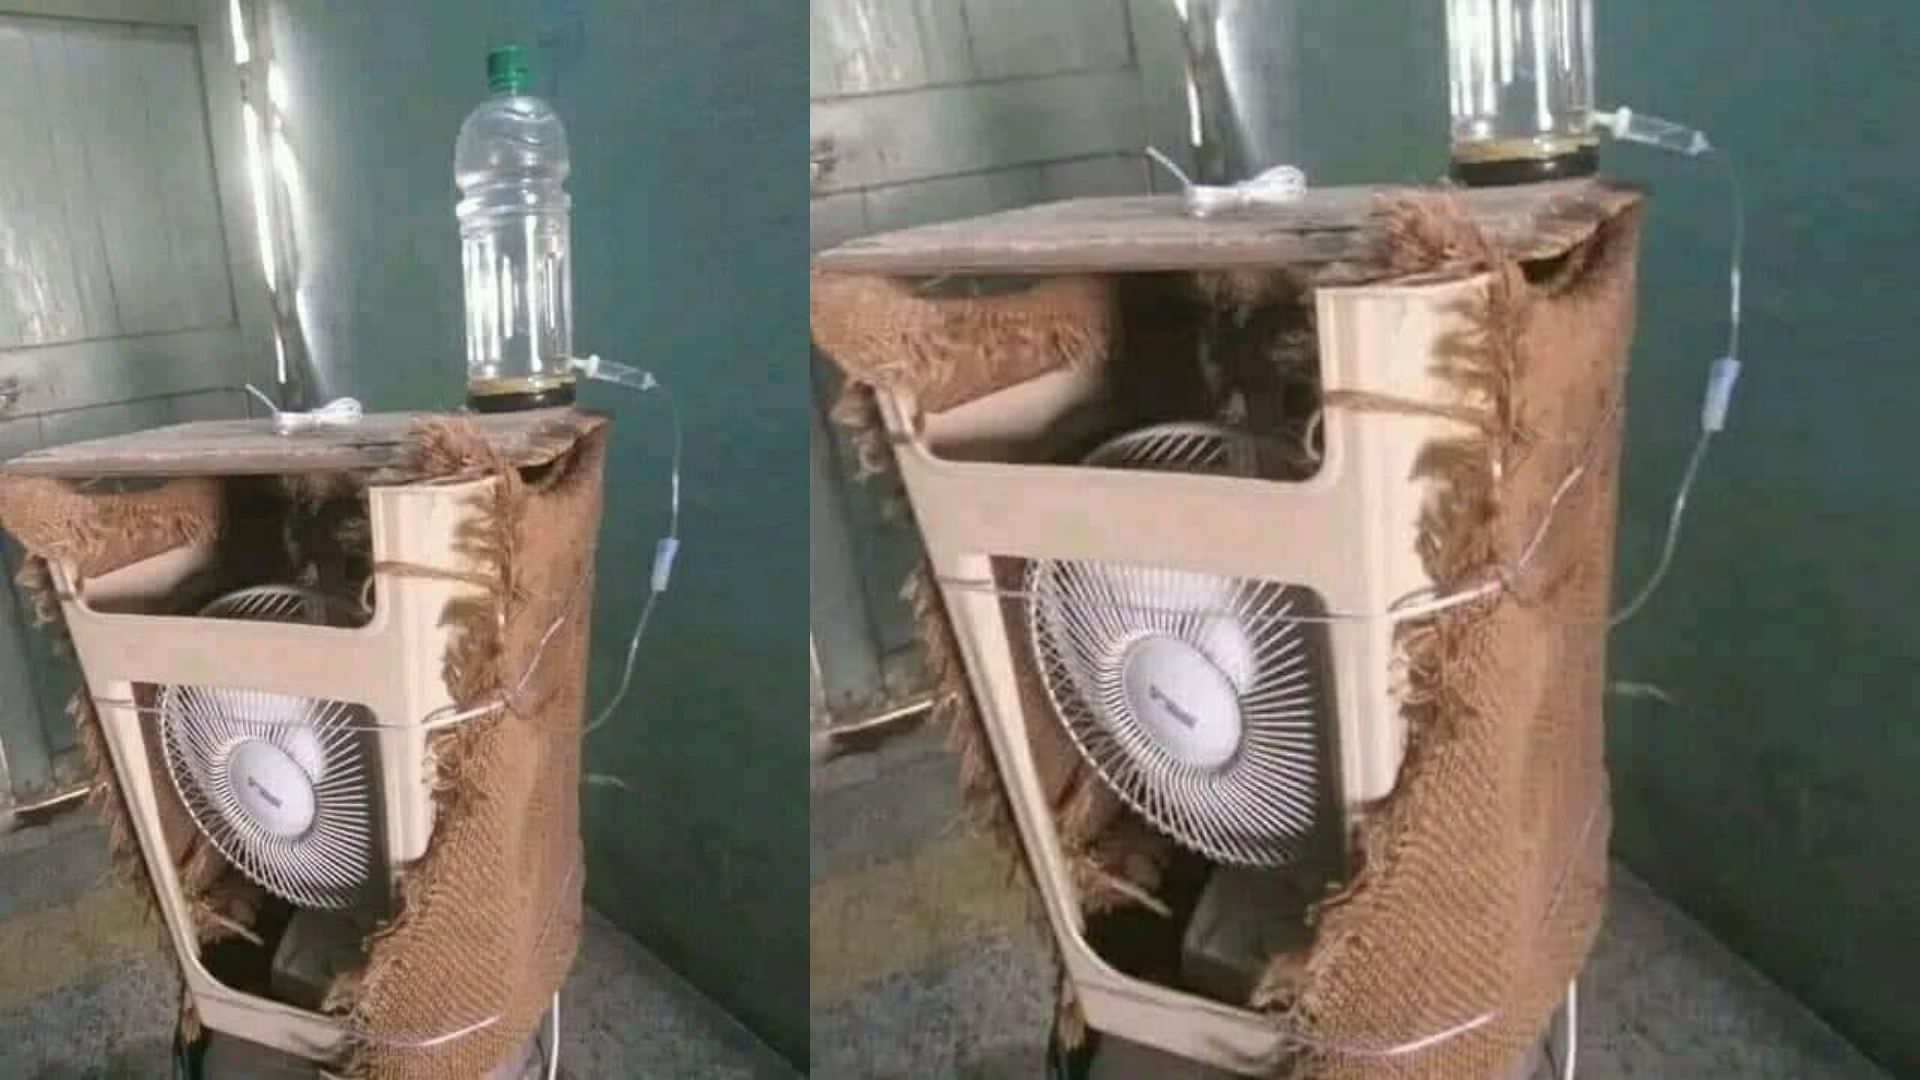 Desi Jugaad man made cooler with table fan and plastic stool jugaad ac photo viral